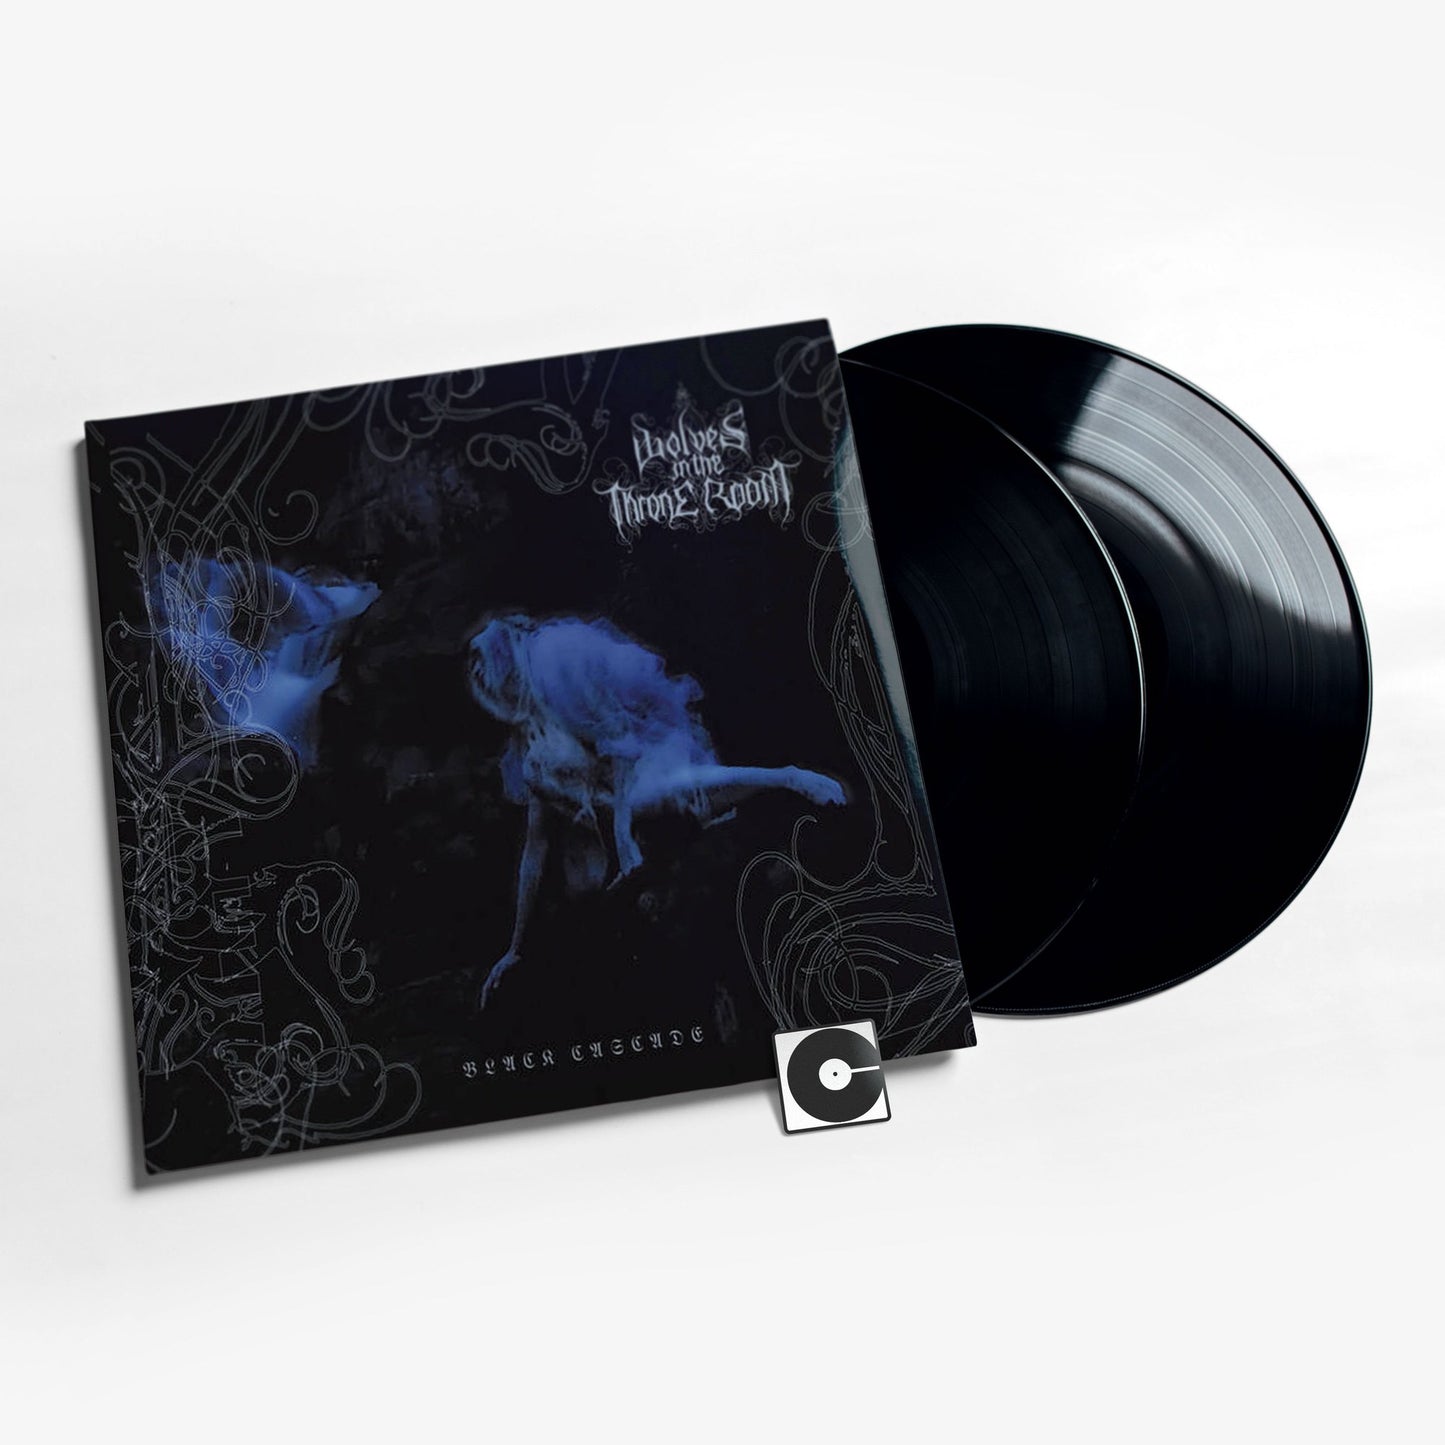 Wolves In The Throne Room - "Black Cascade"